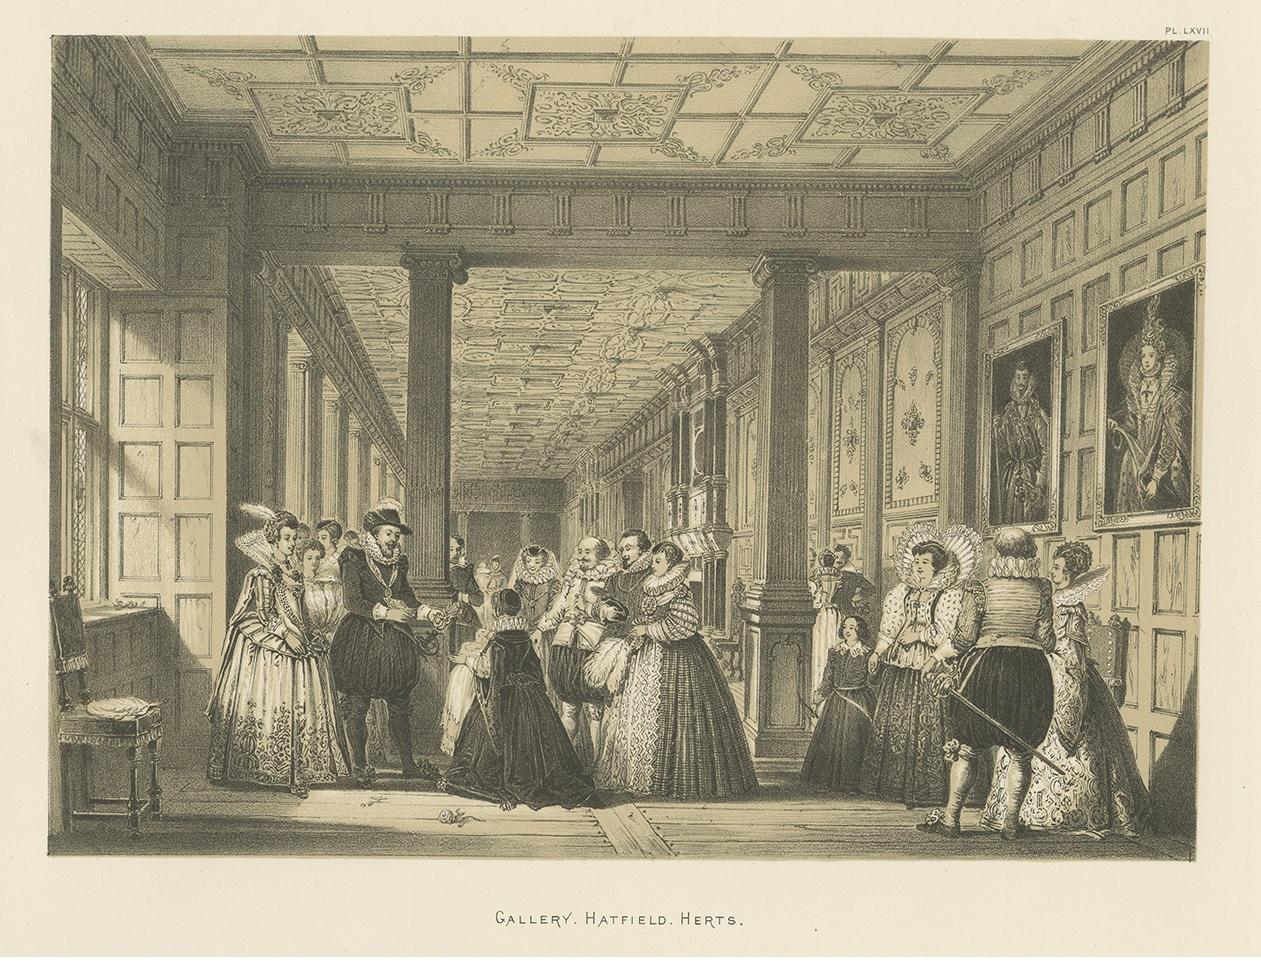 Antique print titled 'Gallery. Hatfield. Herts'. Lithograph of the gallery of Hatfield House in Hertfordshire, a Jacobean House and Garden. This print originates from 'The Mansions of England in the Olden Time' by Joseph Nash.